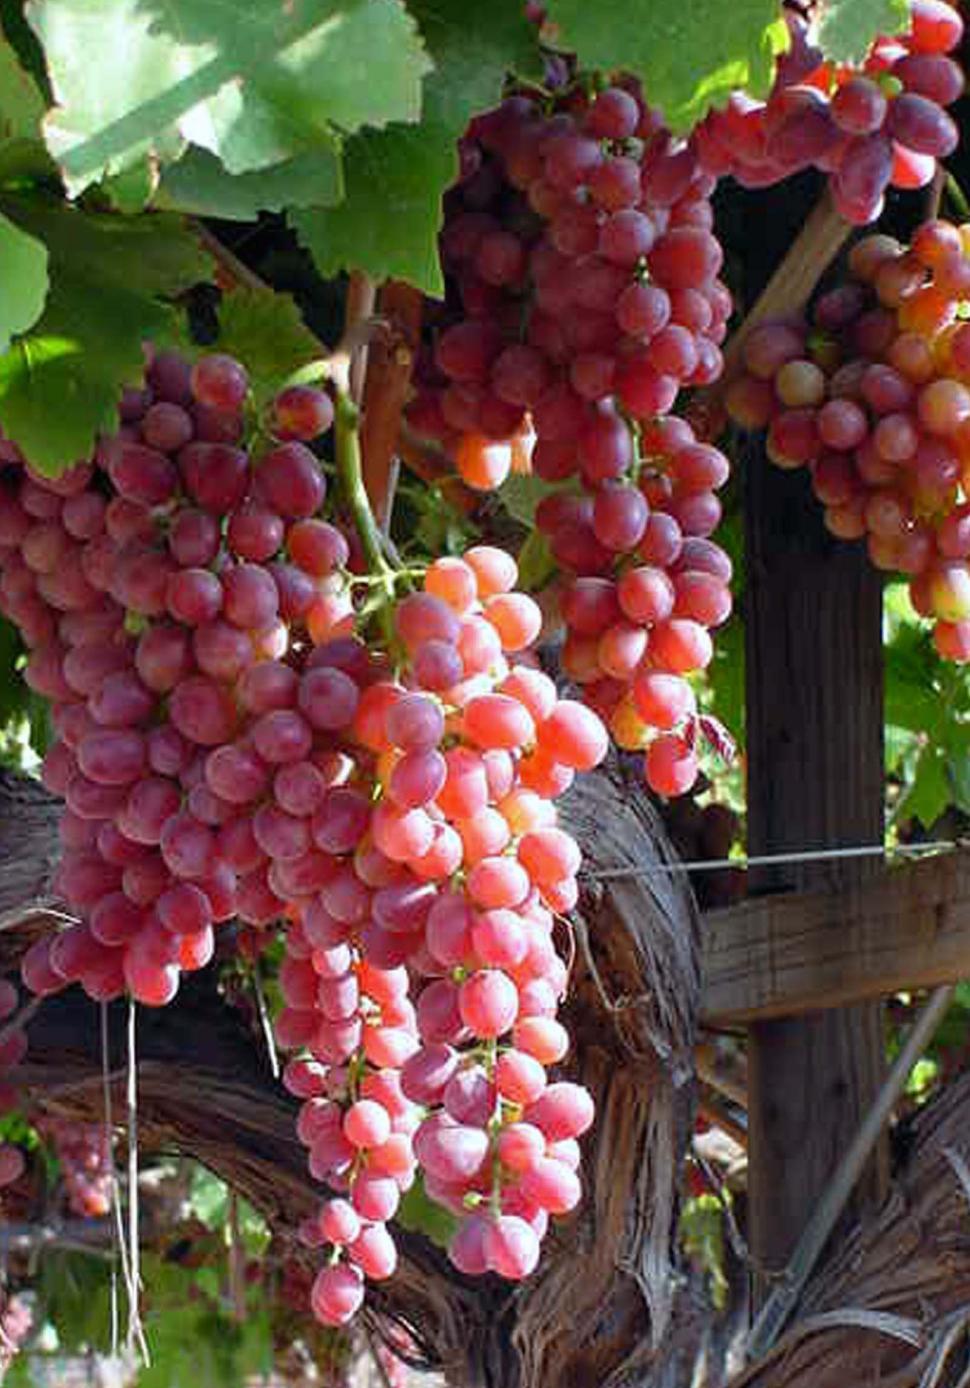 Free Image of Bunch of Grapes Hanging From Vine 